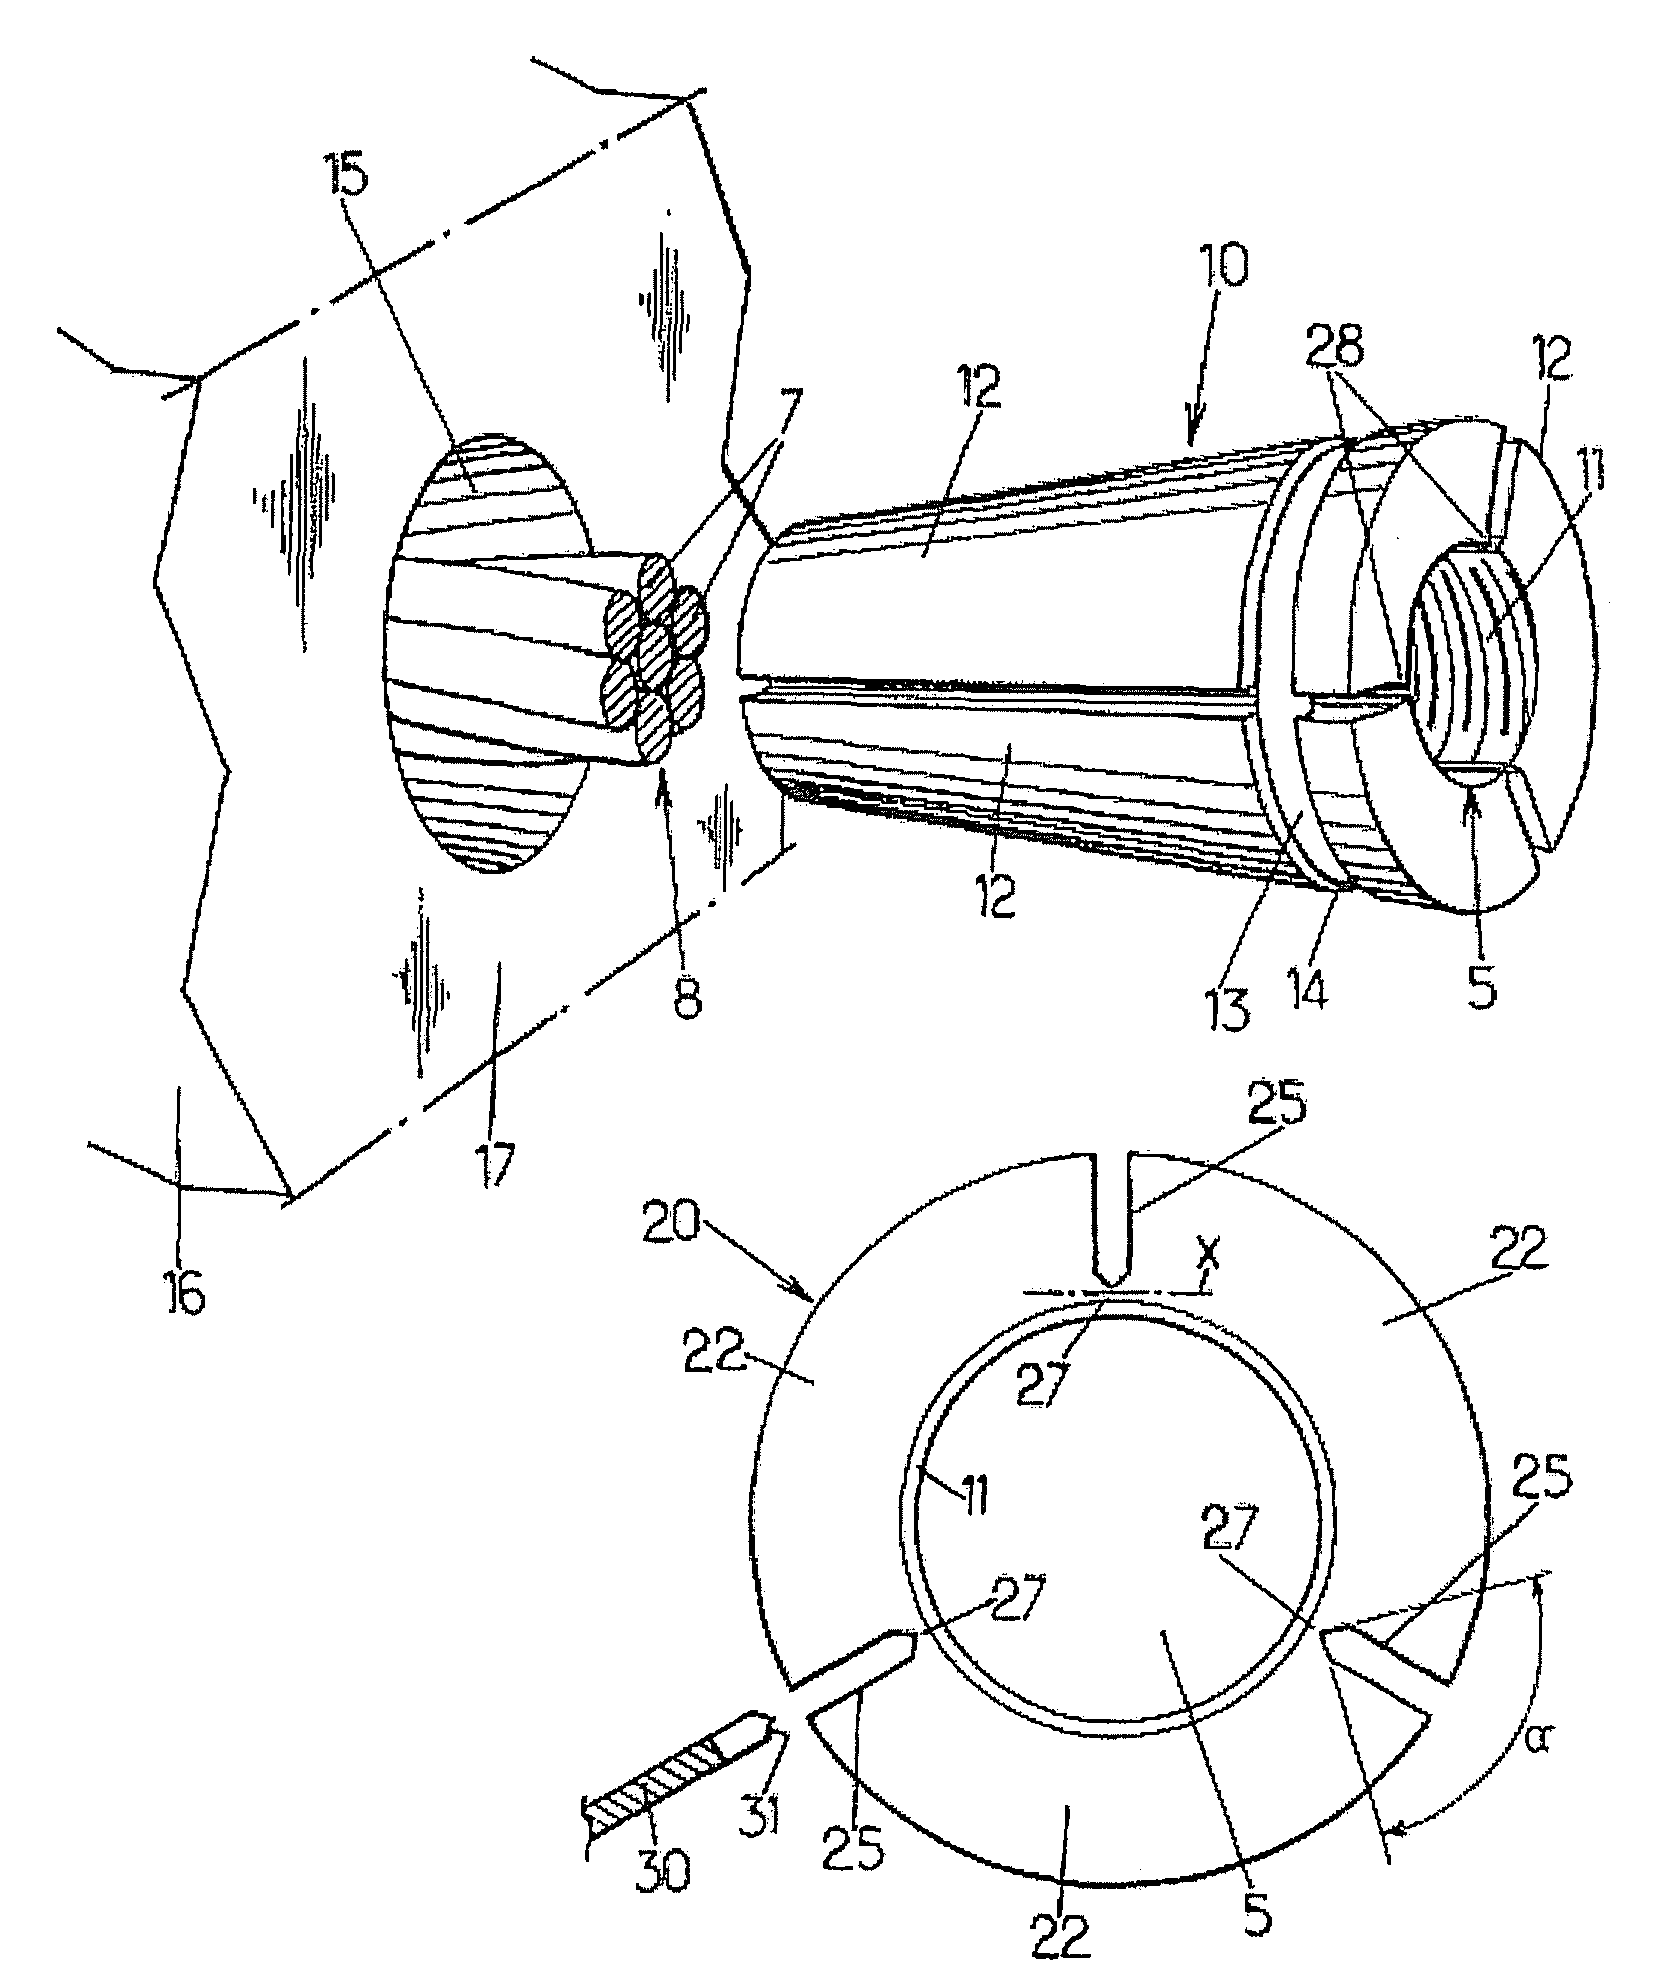 Single-piece part for making a cable anchoring jaw and method for making such a jaw